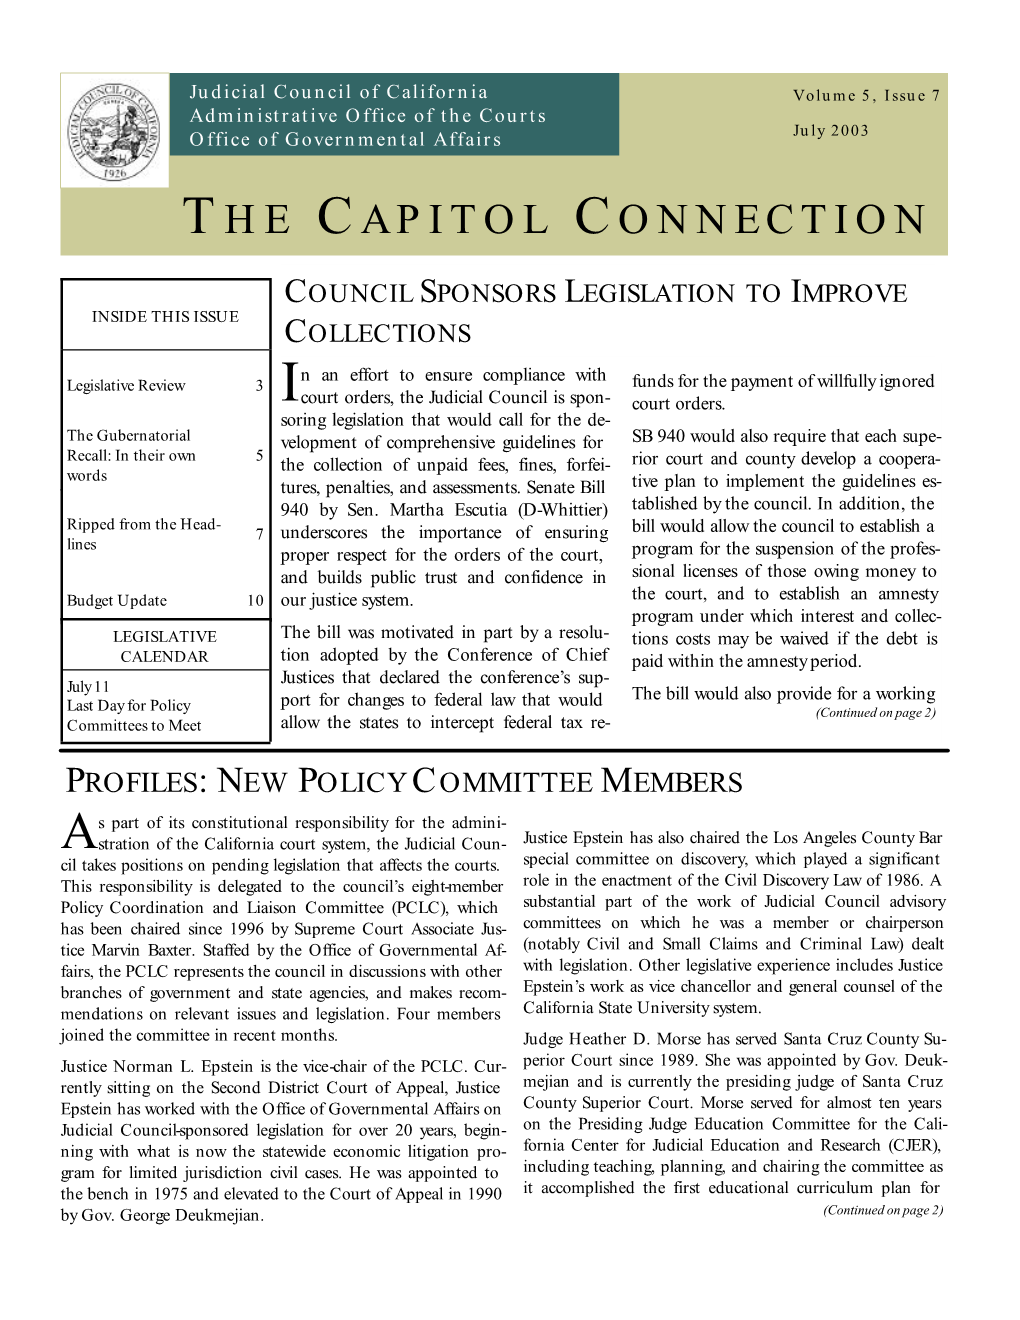 The Capitol Connection Page 2 COUNCIL’S POLICY COMMITTEE MEMBER PROFILES